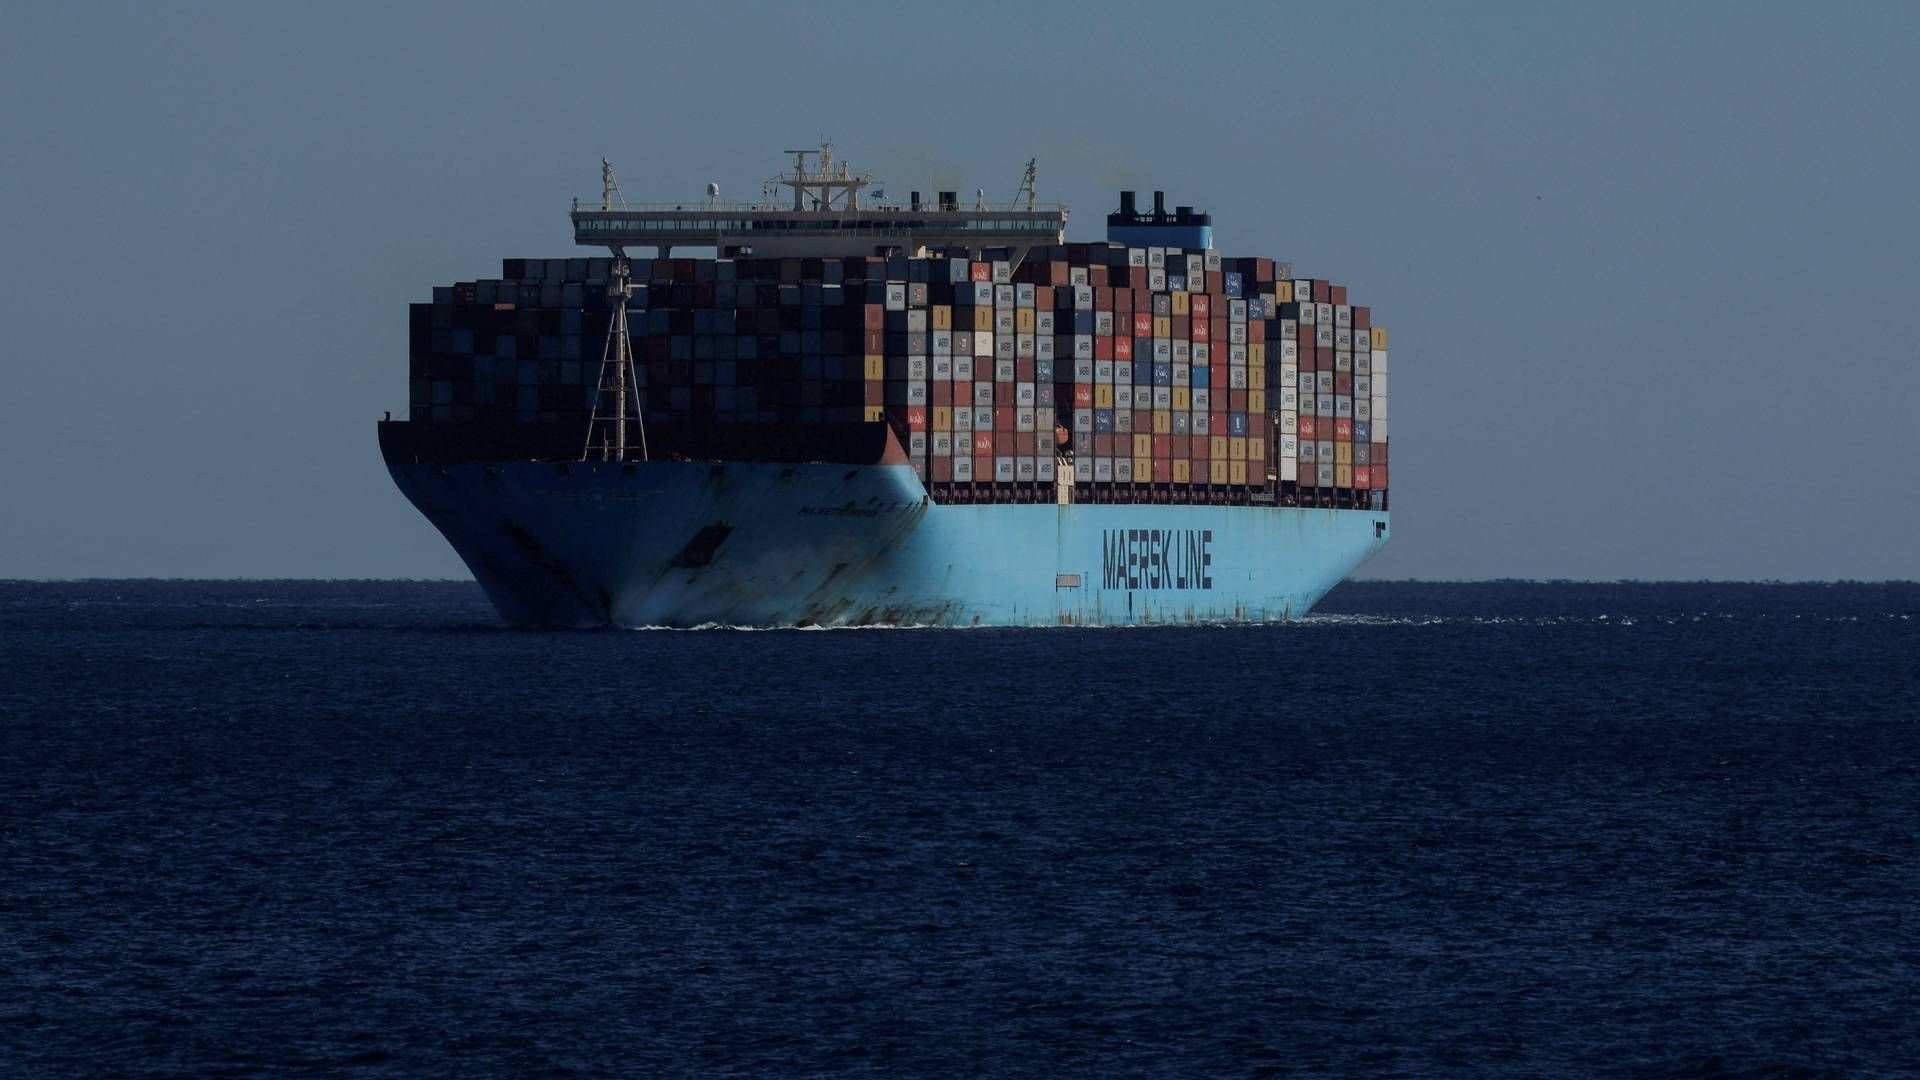 Last week a Maersk vessel was attacked. | Photo: The Maersk vessel Marsk Gibraltar was attacked on Thursday.